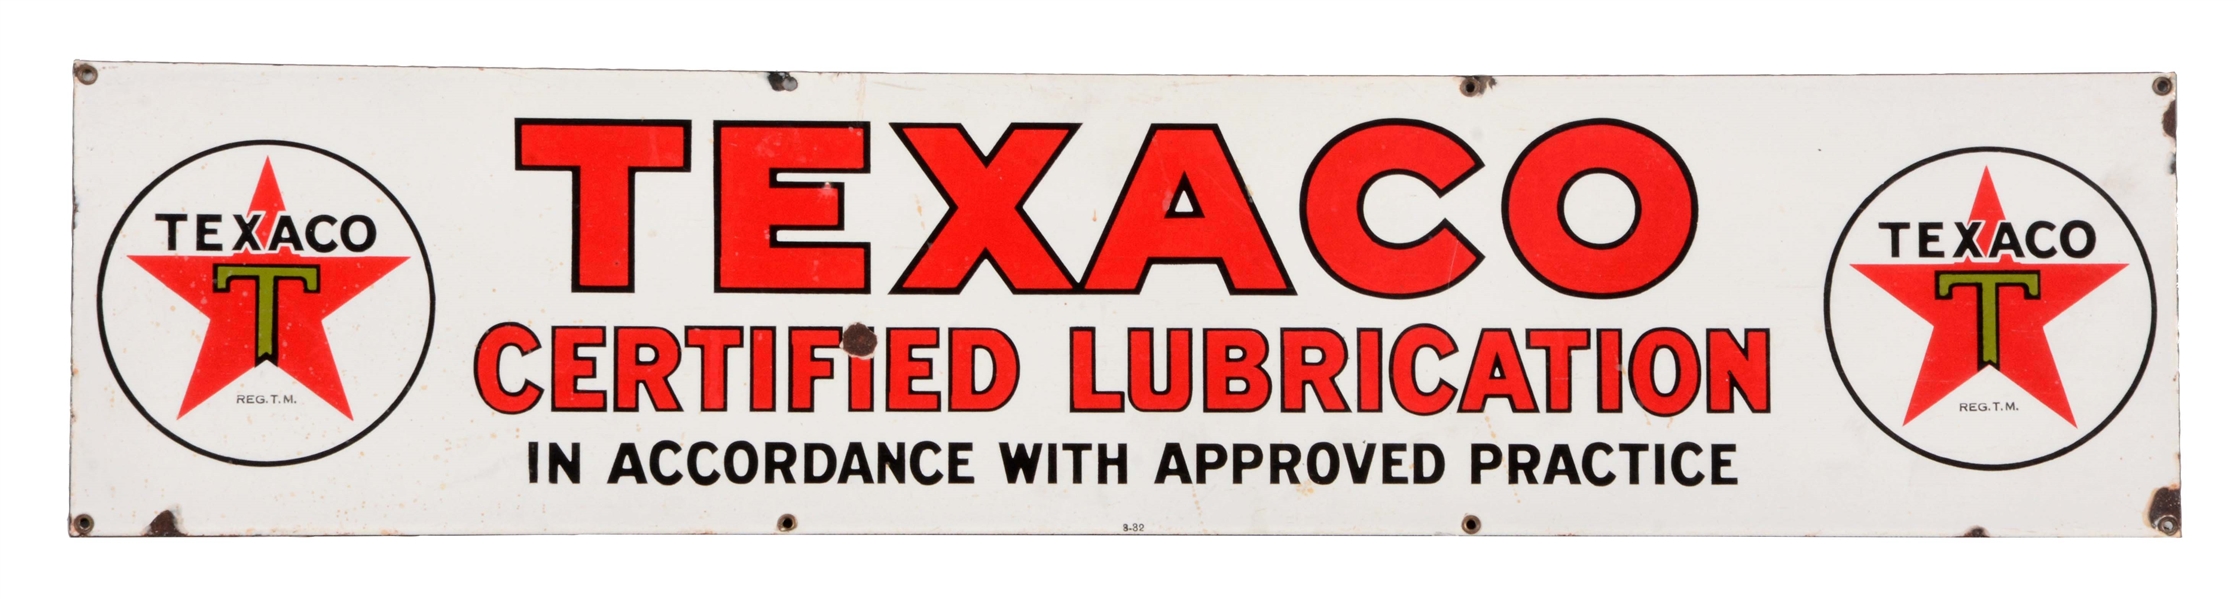 TEXACO CERTIFIED LUBRICATION PORCELAIN STRIP SIGN.